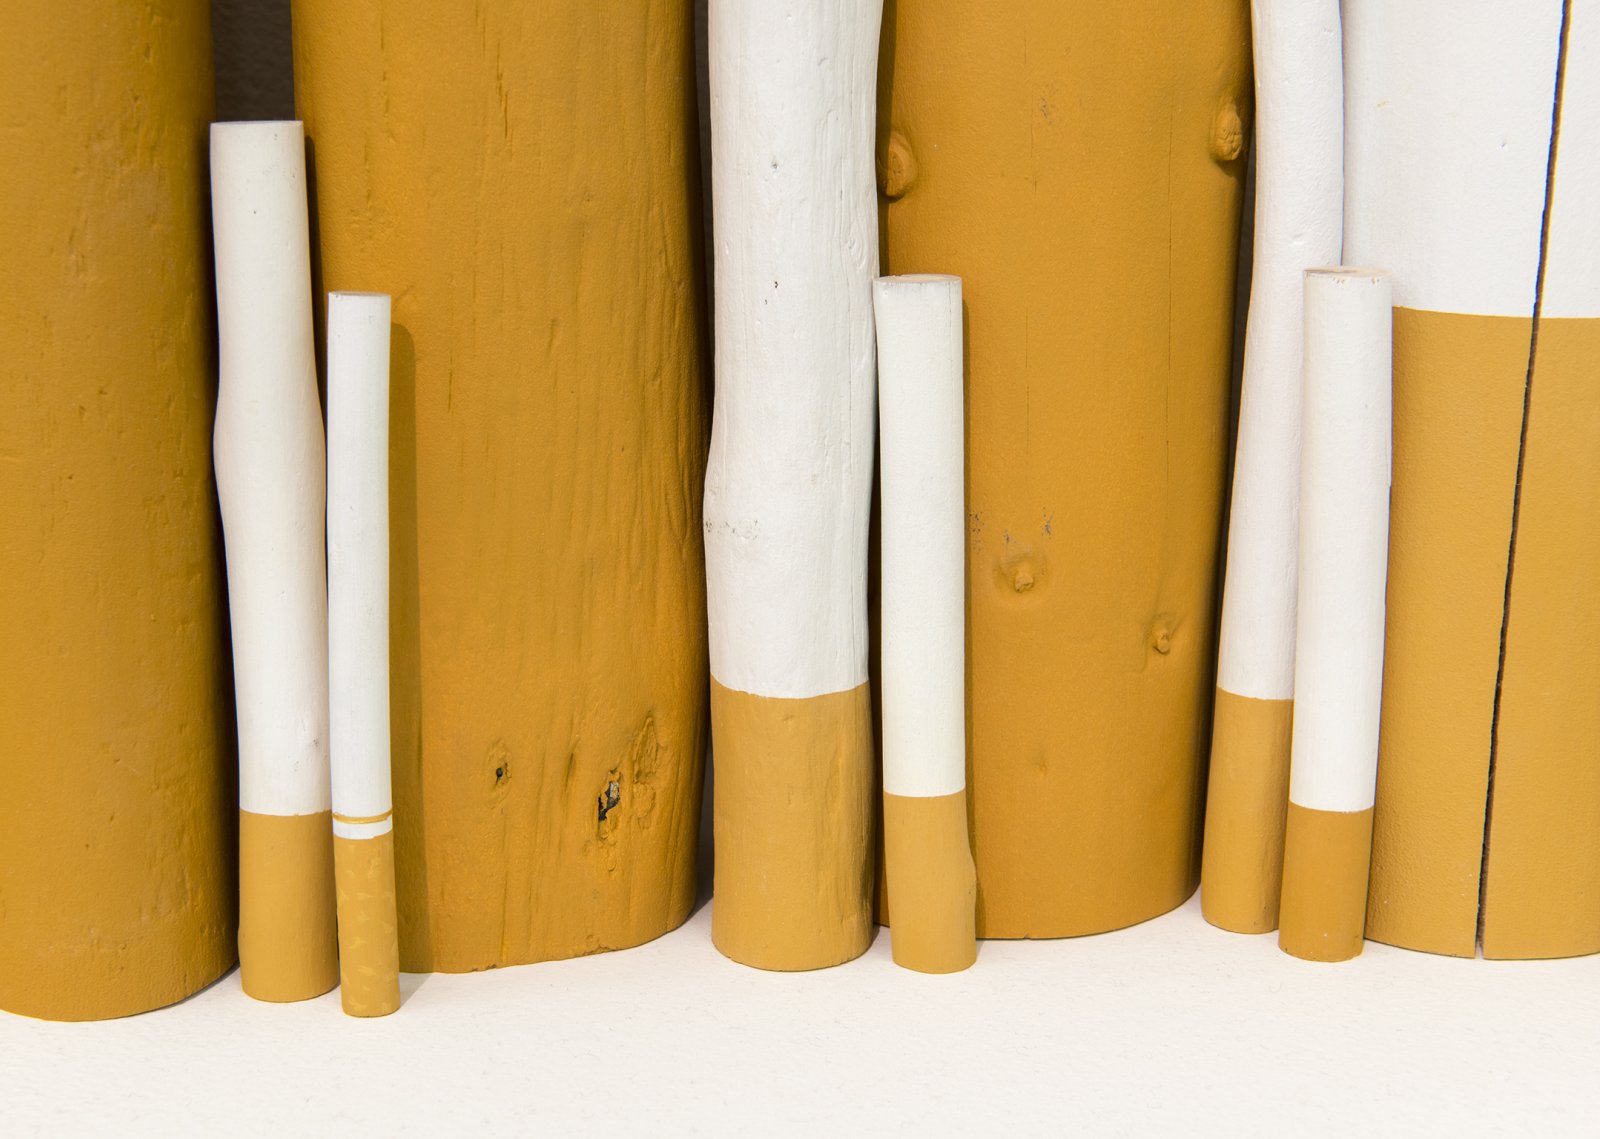 Liz Magor, The Rules (detail), 2012, wood, paint, 38 x 180 x 10 in. (97 x 457 x 25 cm) by Liz Magor